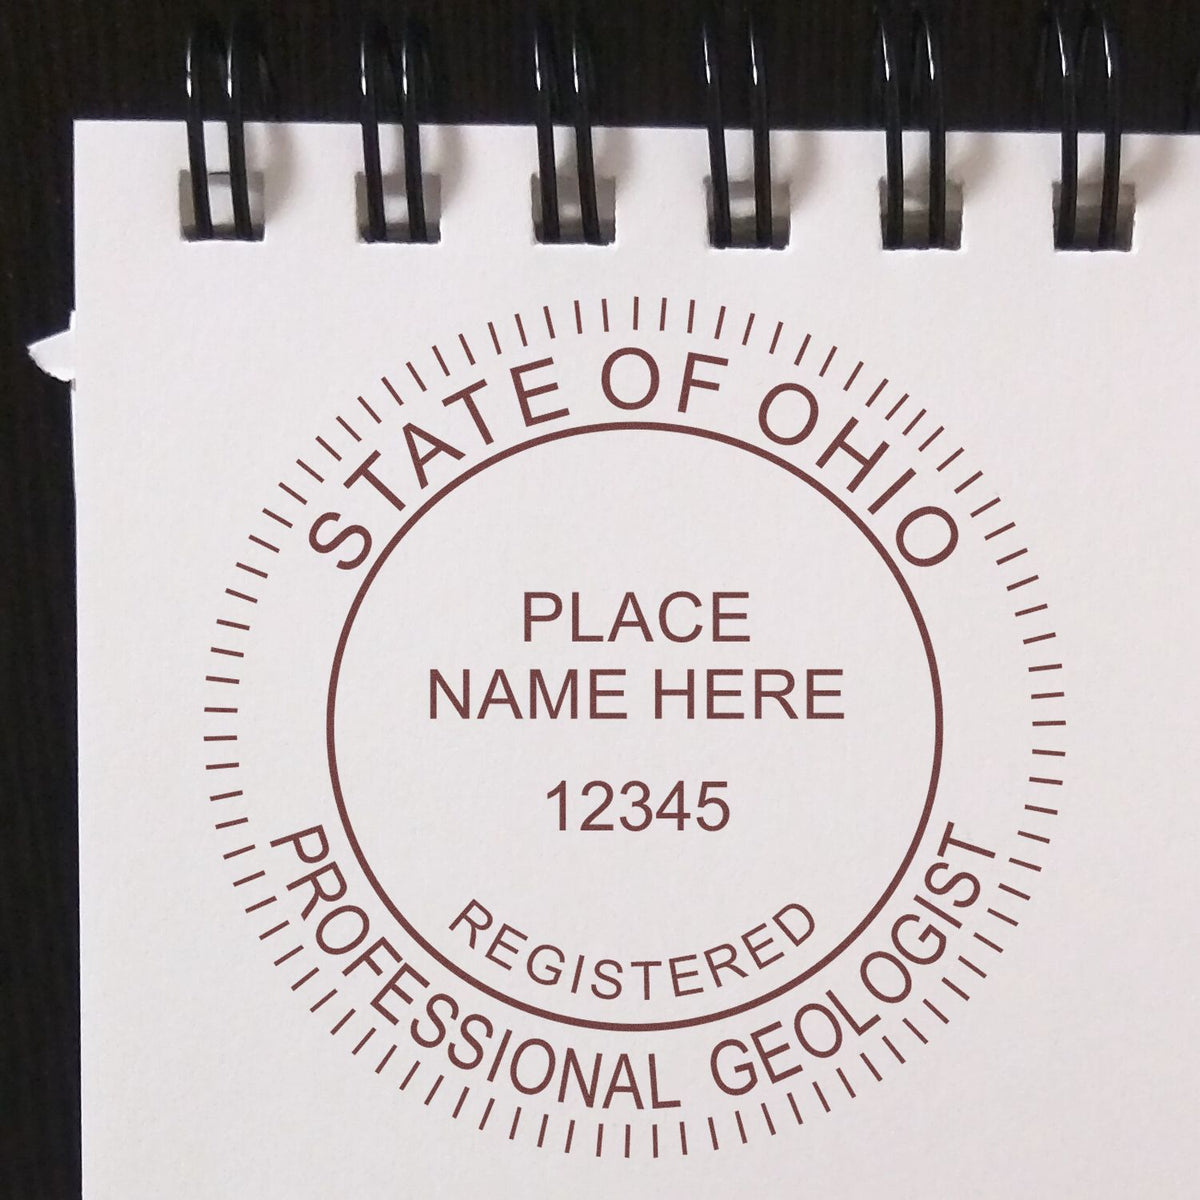 Another Example of a stamped impression of the Ohio Professional Geologist Seal Stamp on a office form